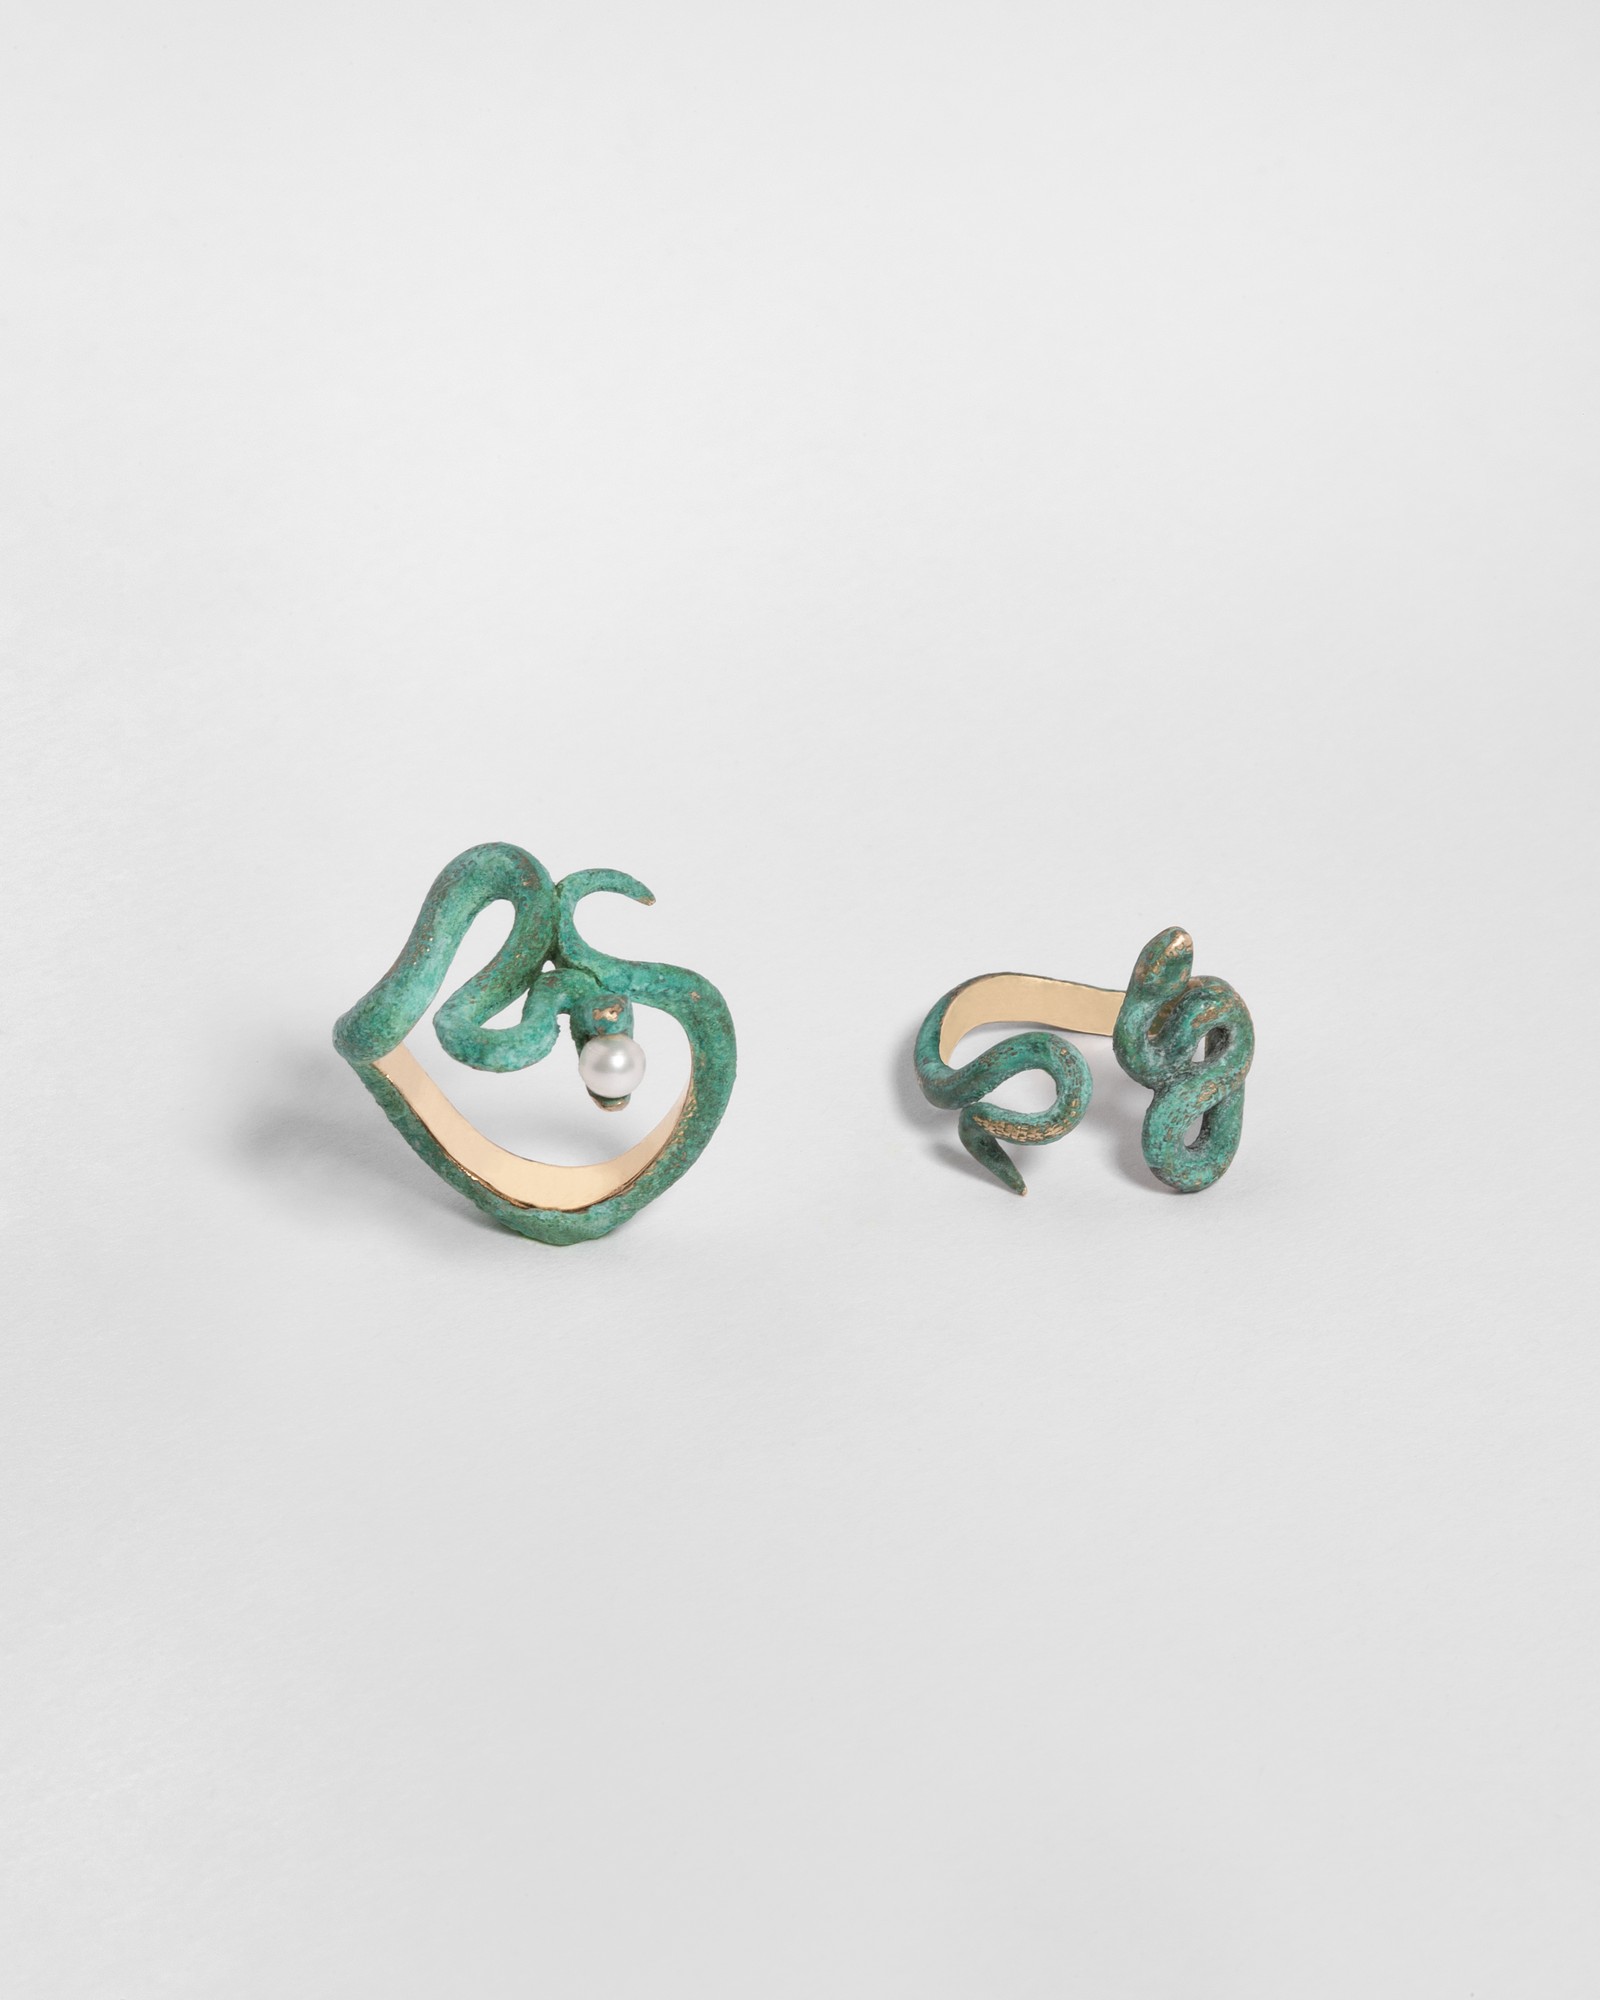 SNAKES DUO RINGS IN PATINA